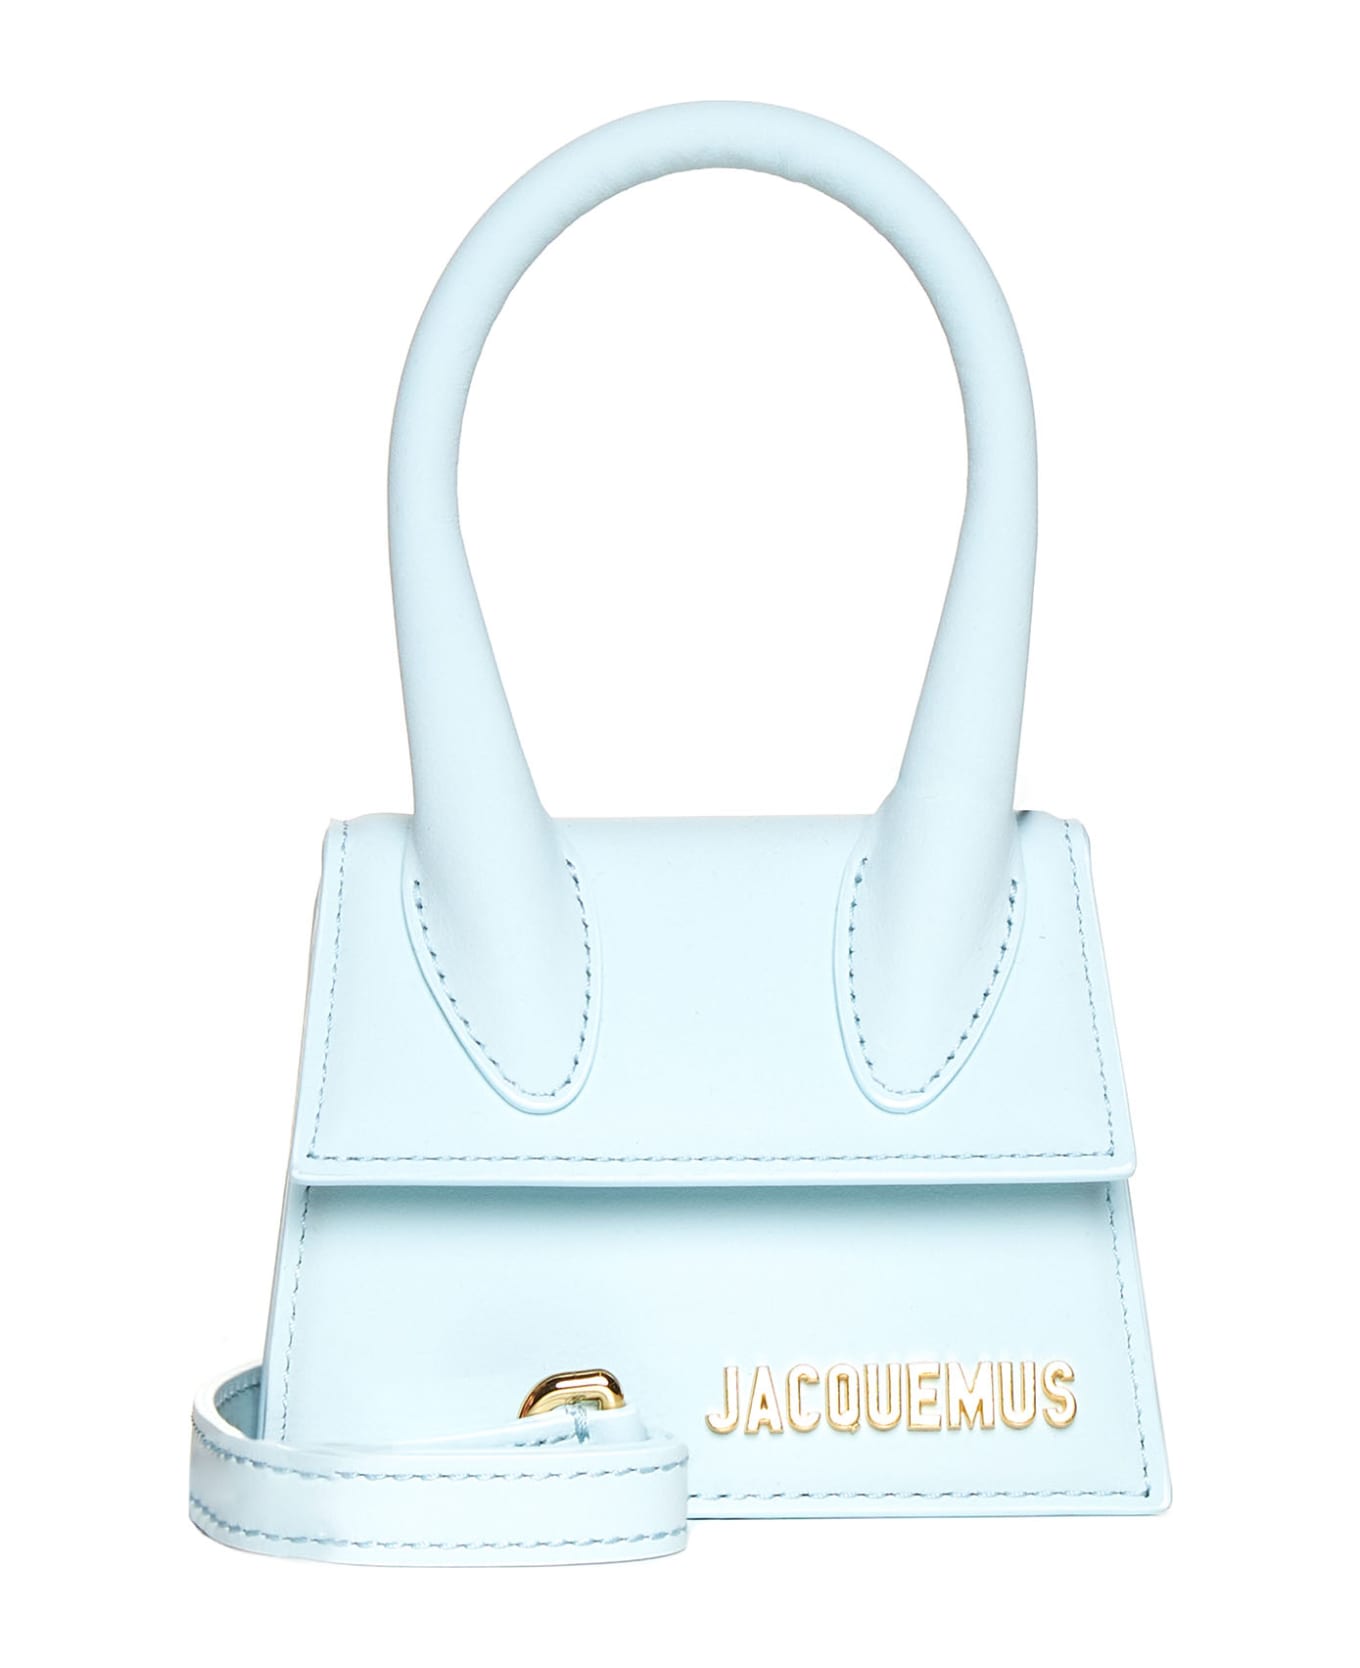 Jacquemus Tote - Pale blue トートバッグ